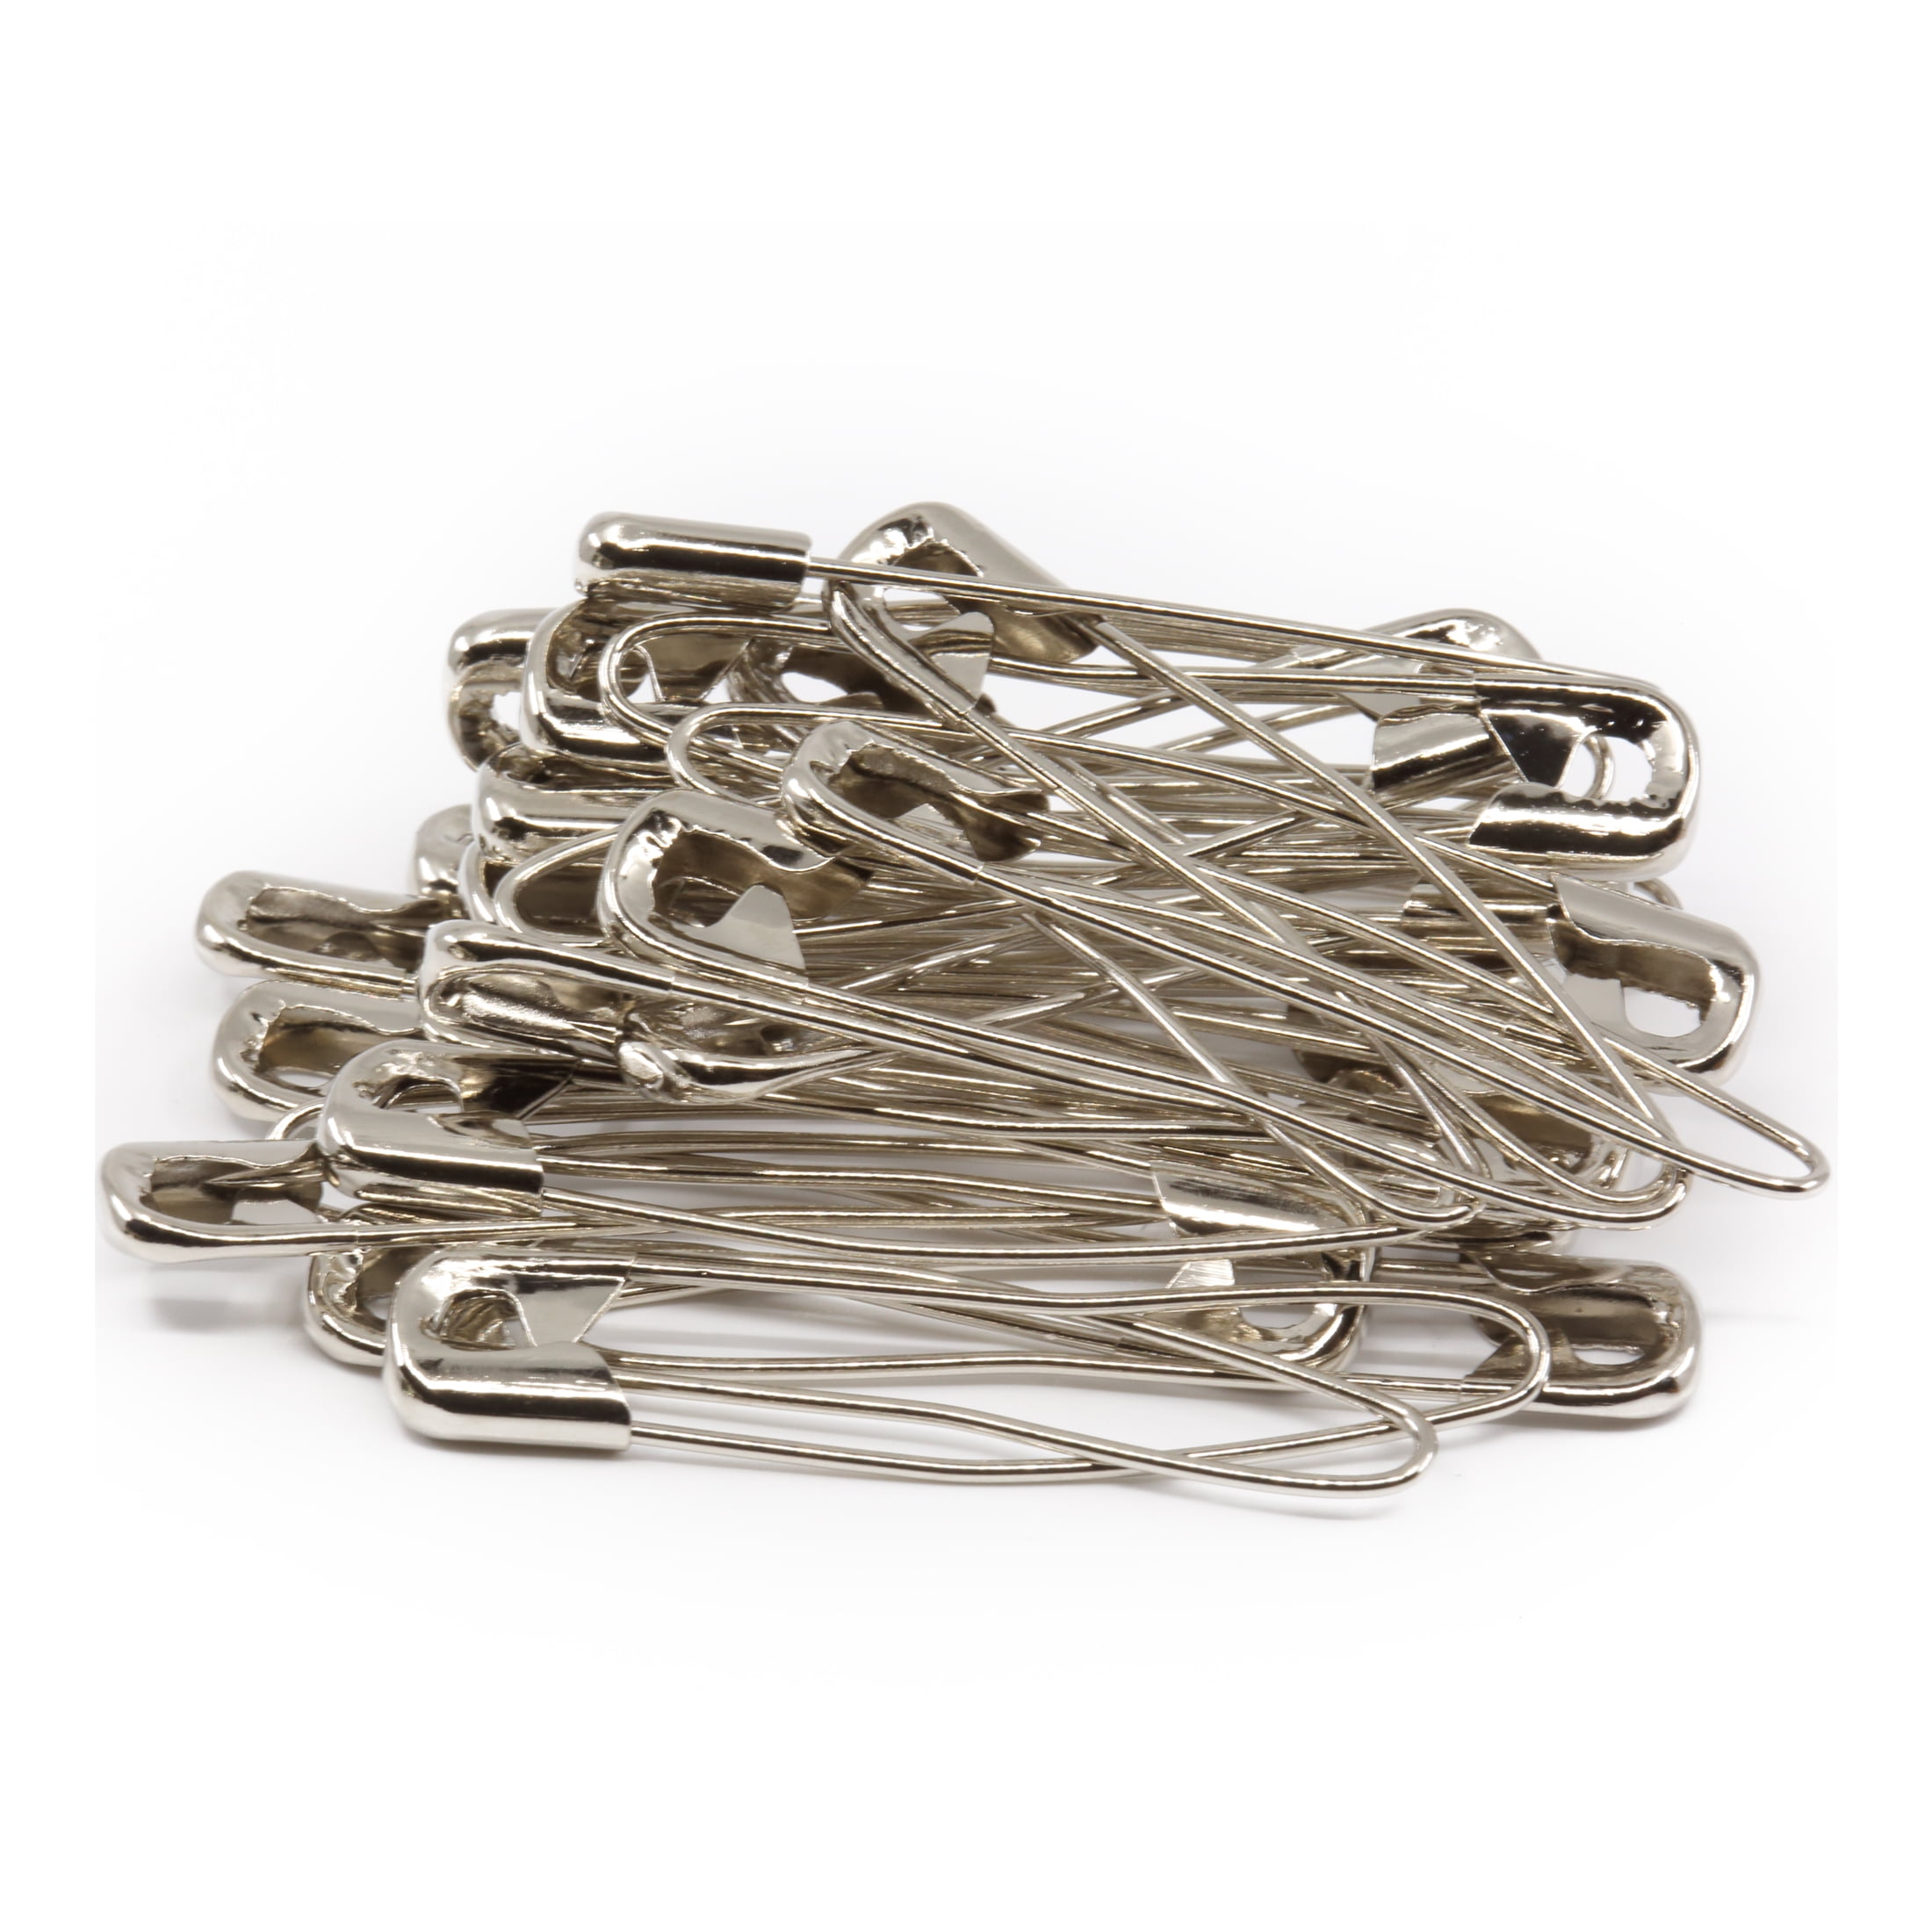 CURVED SAFETY PINS – SIL THREAD INC.